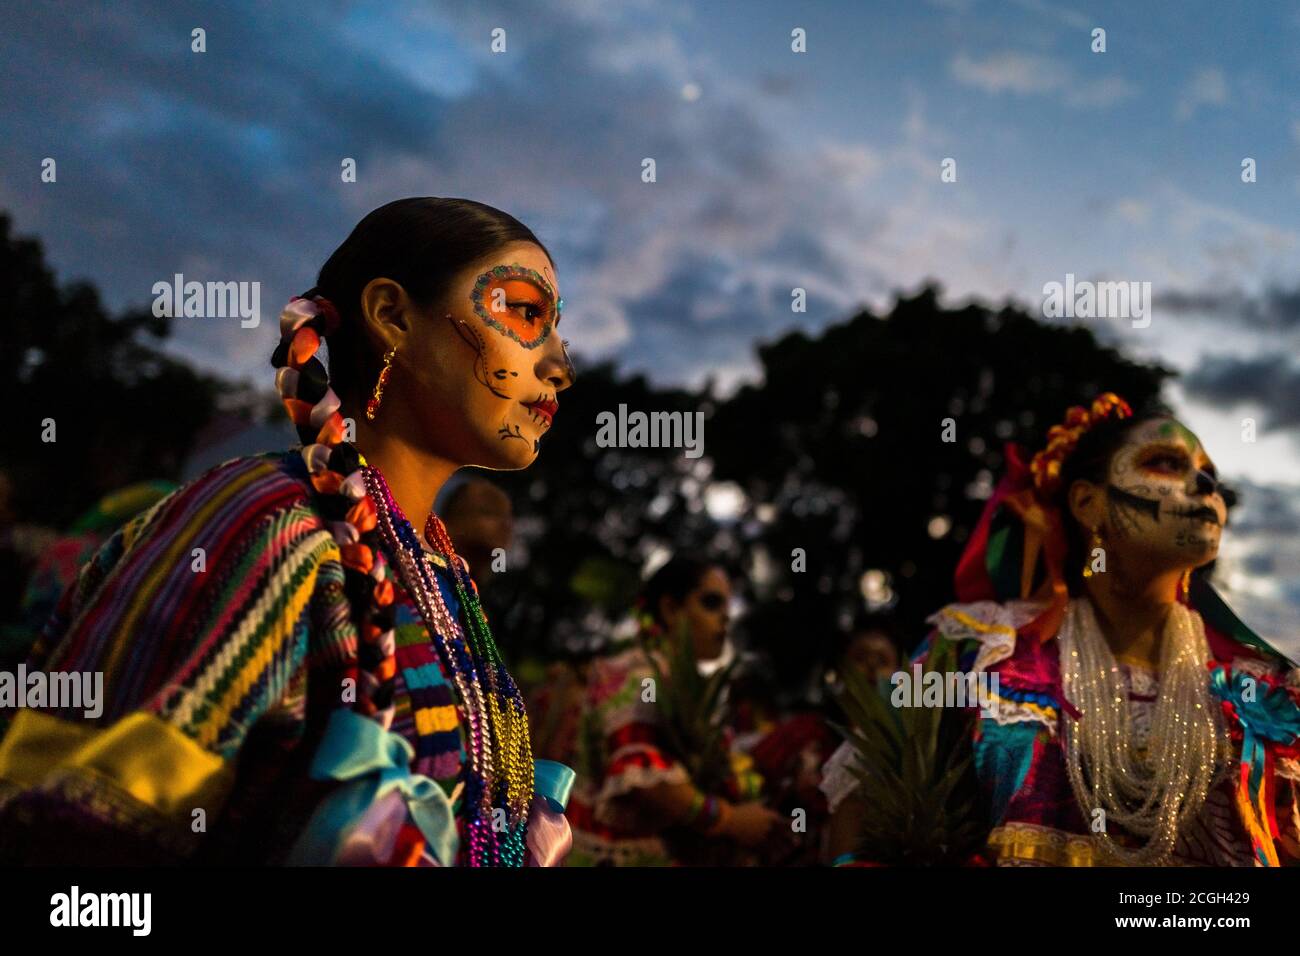 Young Mexican women, dressed as La Catrina, take part in the Day of the Dead parade in Oaxaca, Mexico. Stock Photo